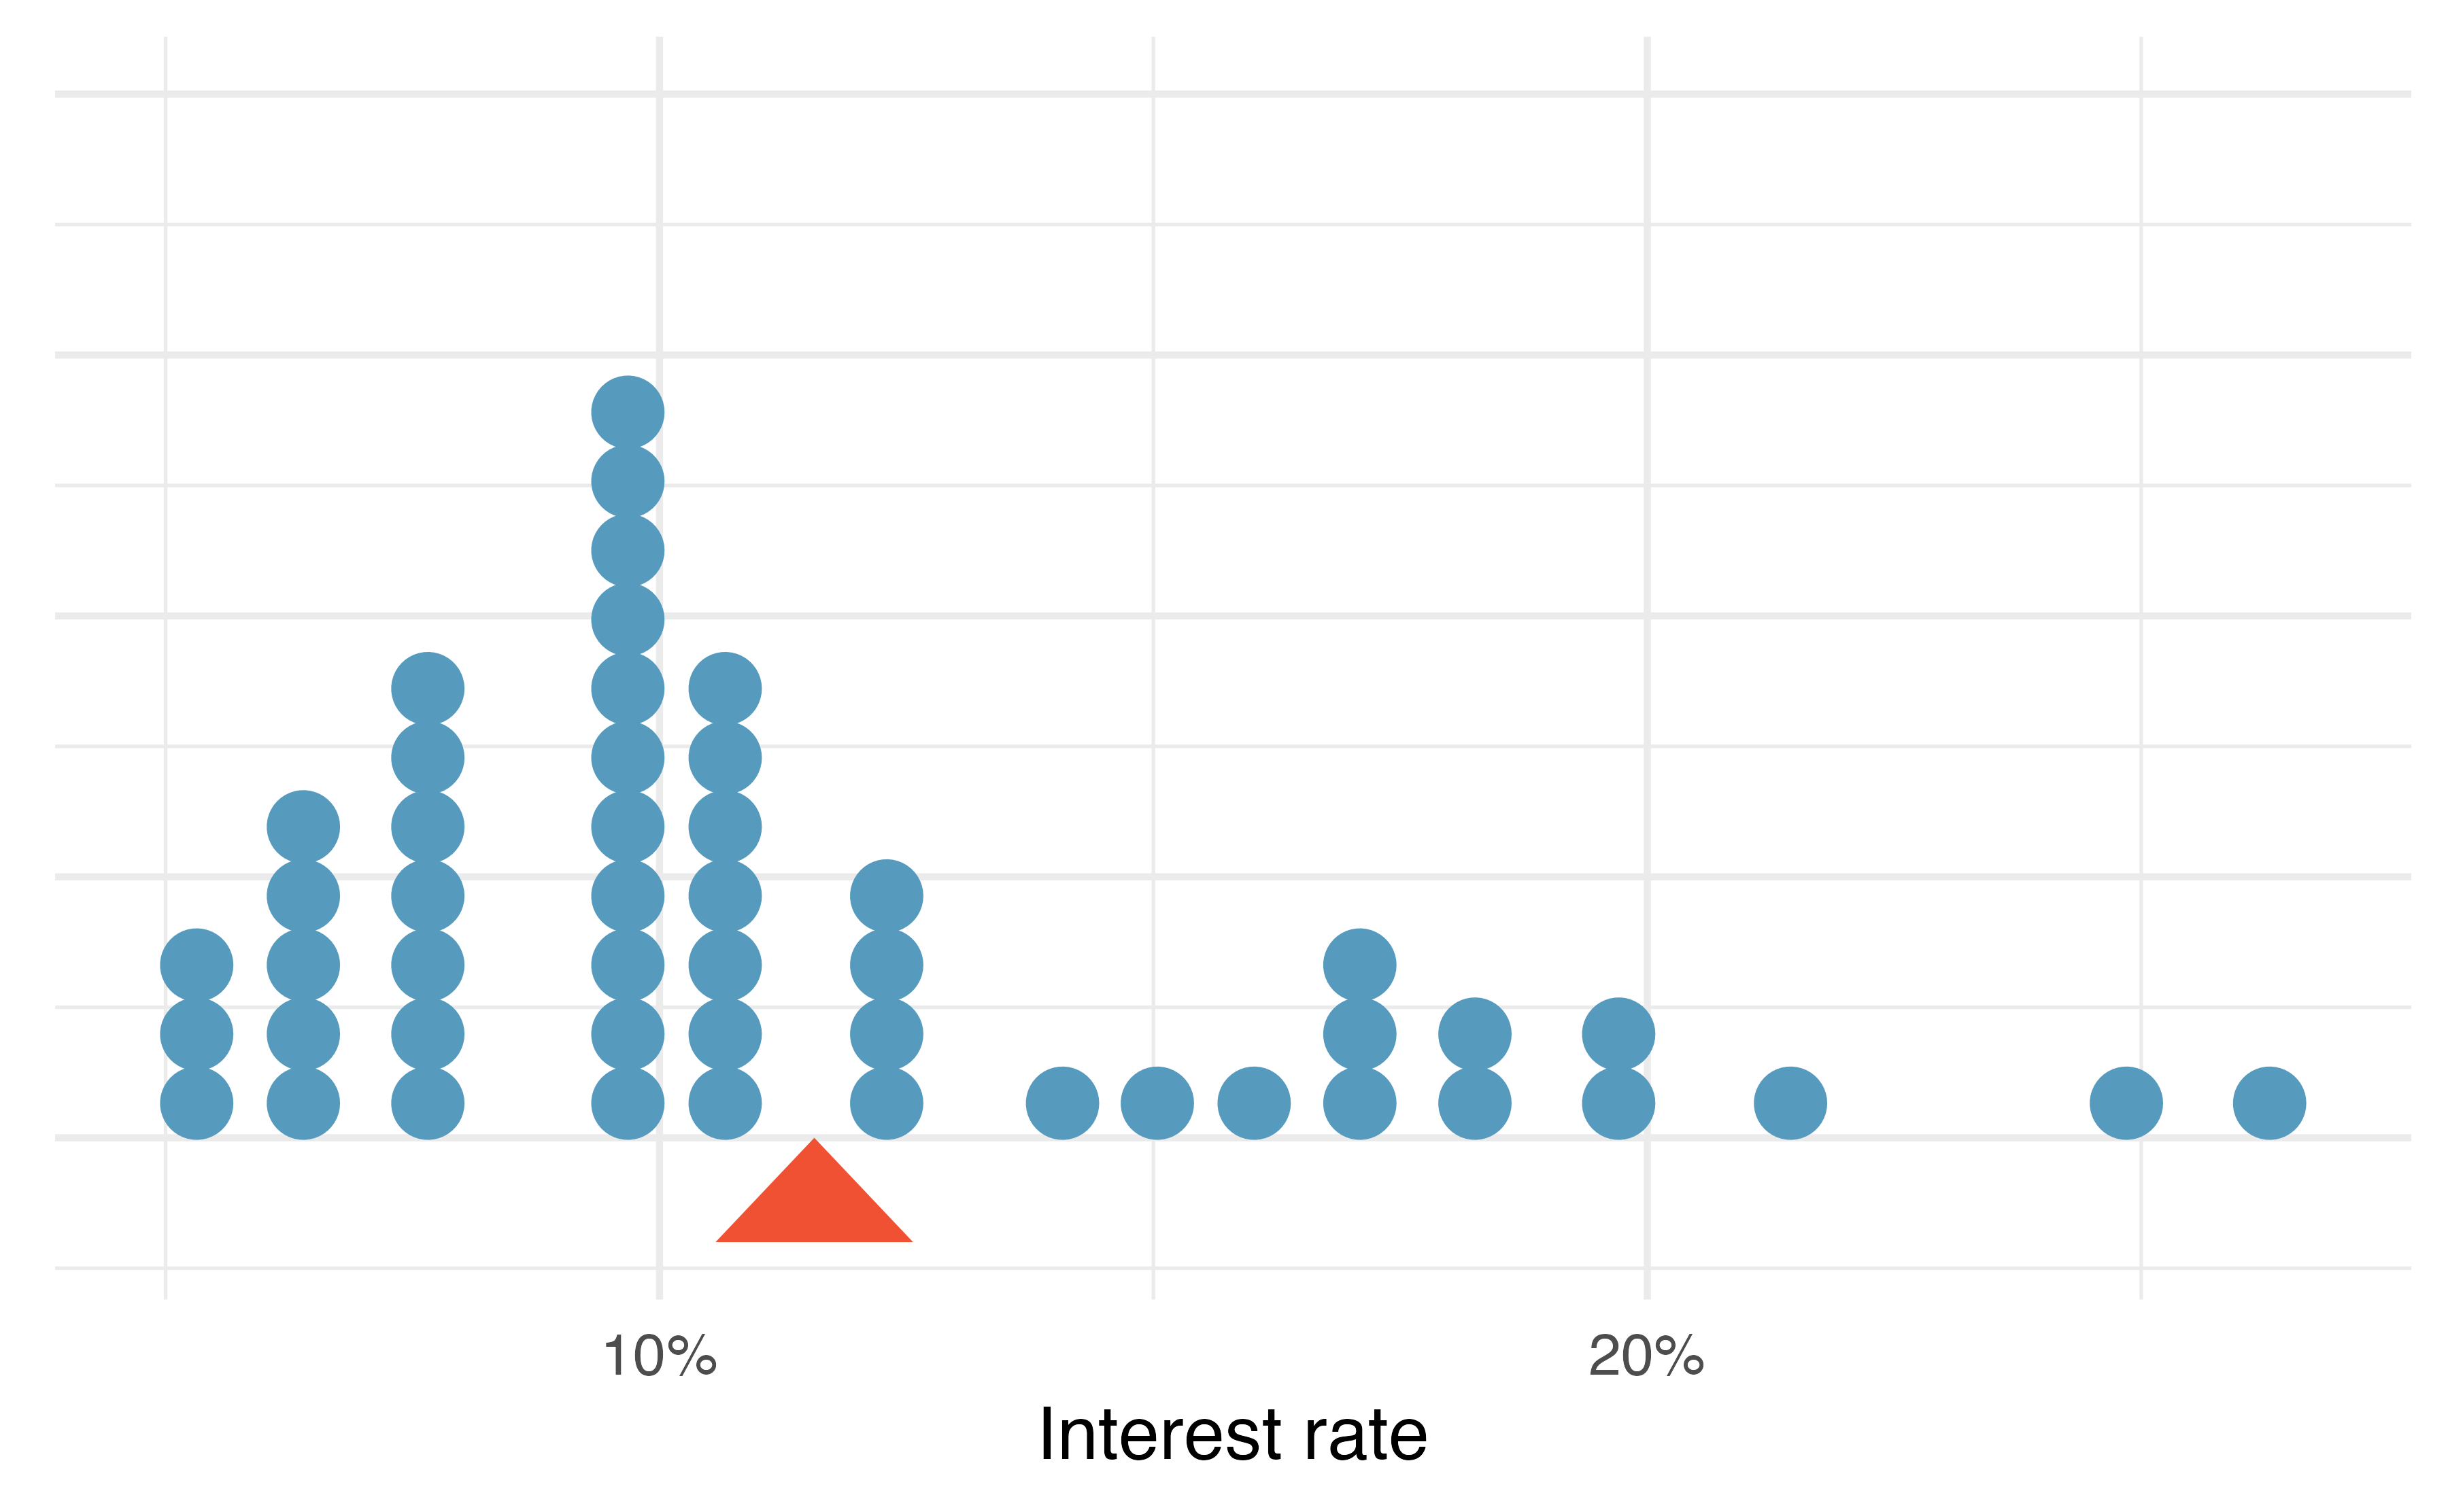 A dot plot of interest rate for the loan50 dataset. The rates have been rounded to the nearest percent in this plot, and the distribution’s mean is shown as a red triangle.